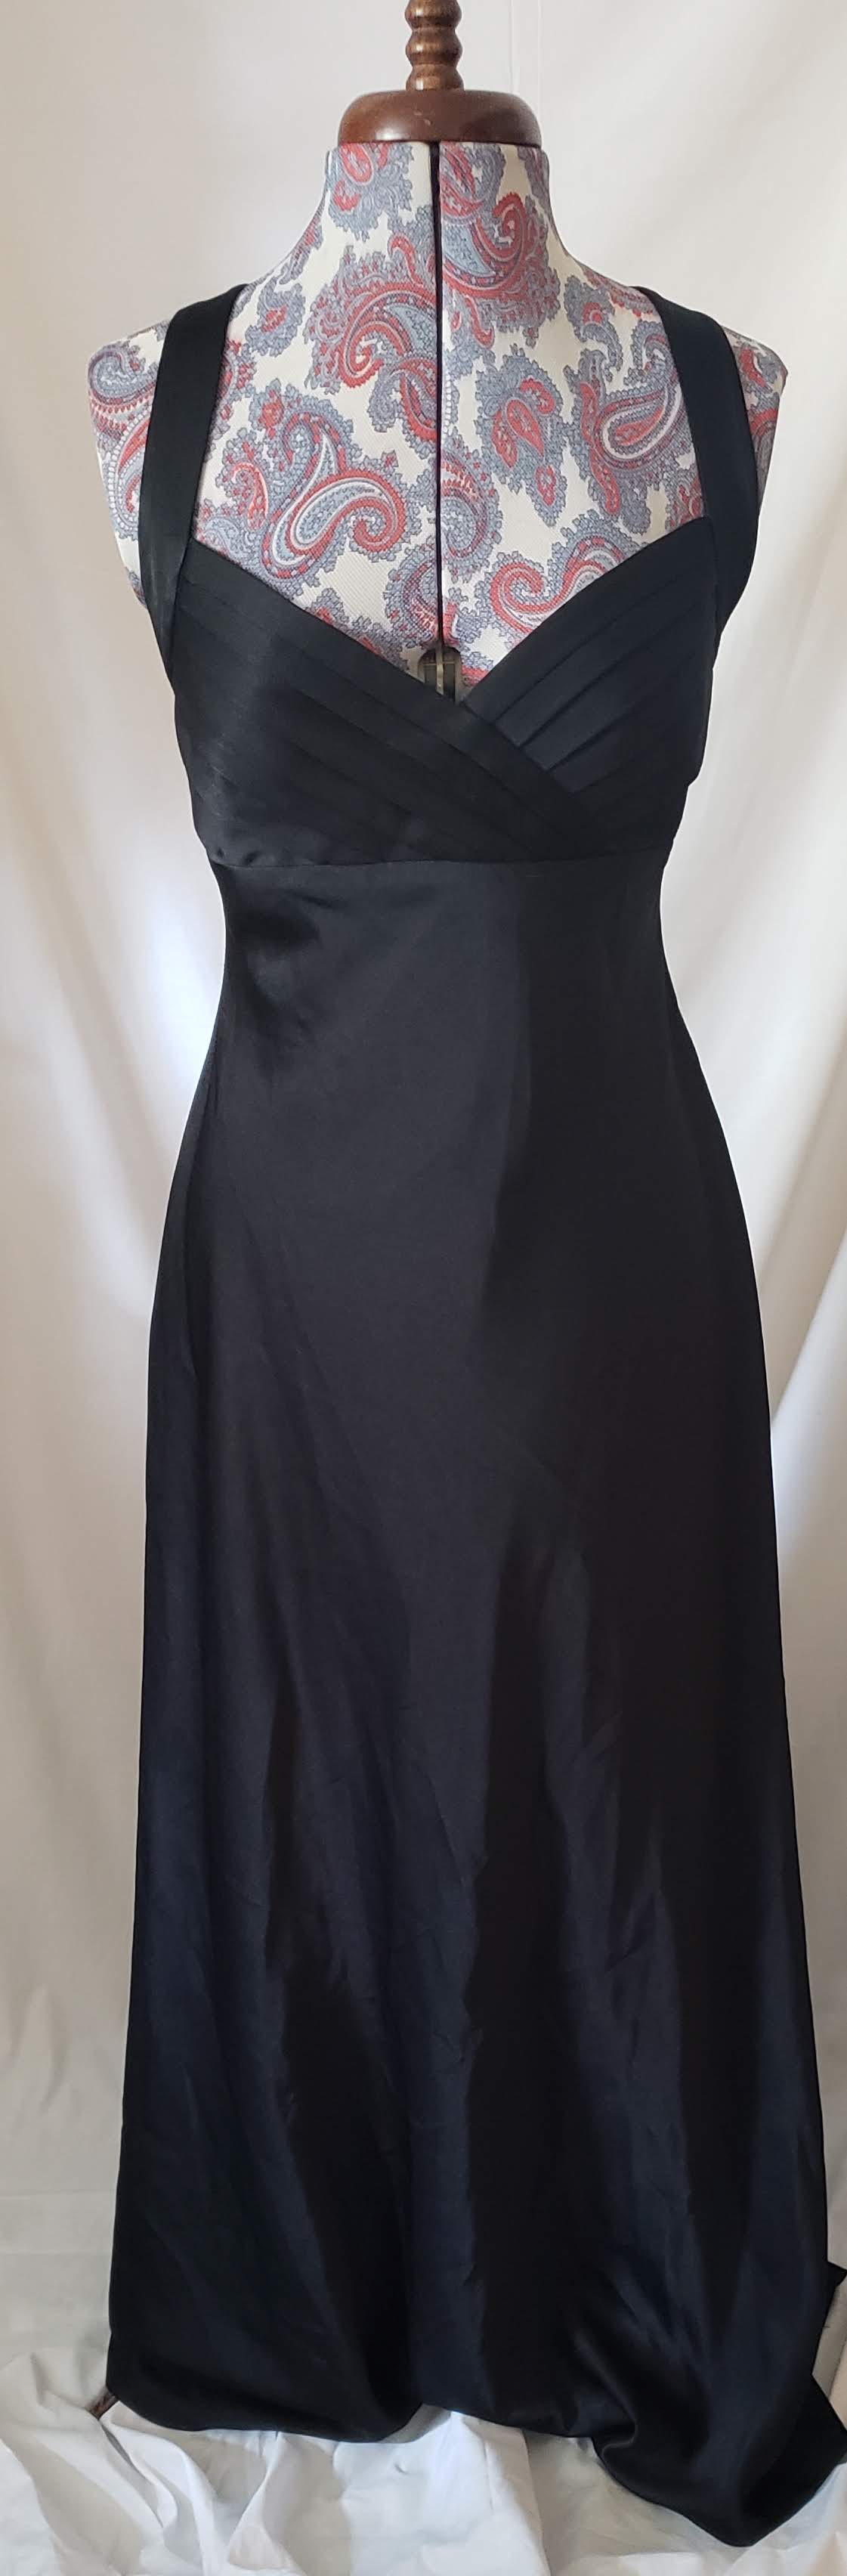 Perfect for Any Occasion Black Formal Calvin Klein Dress – Aunt Gladys'  Attic